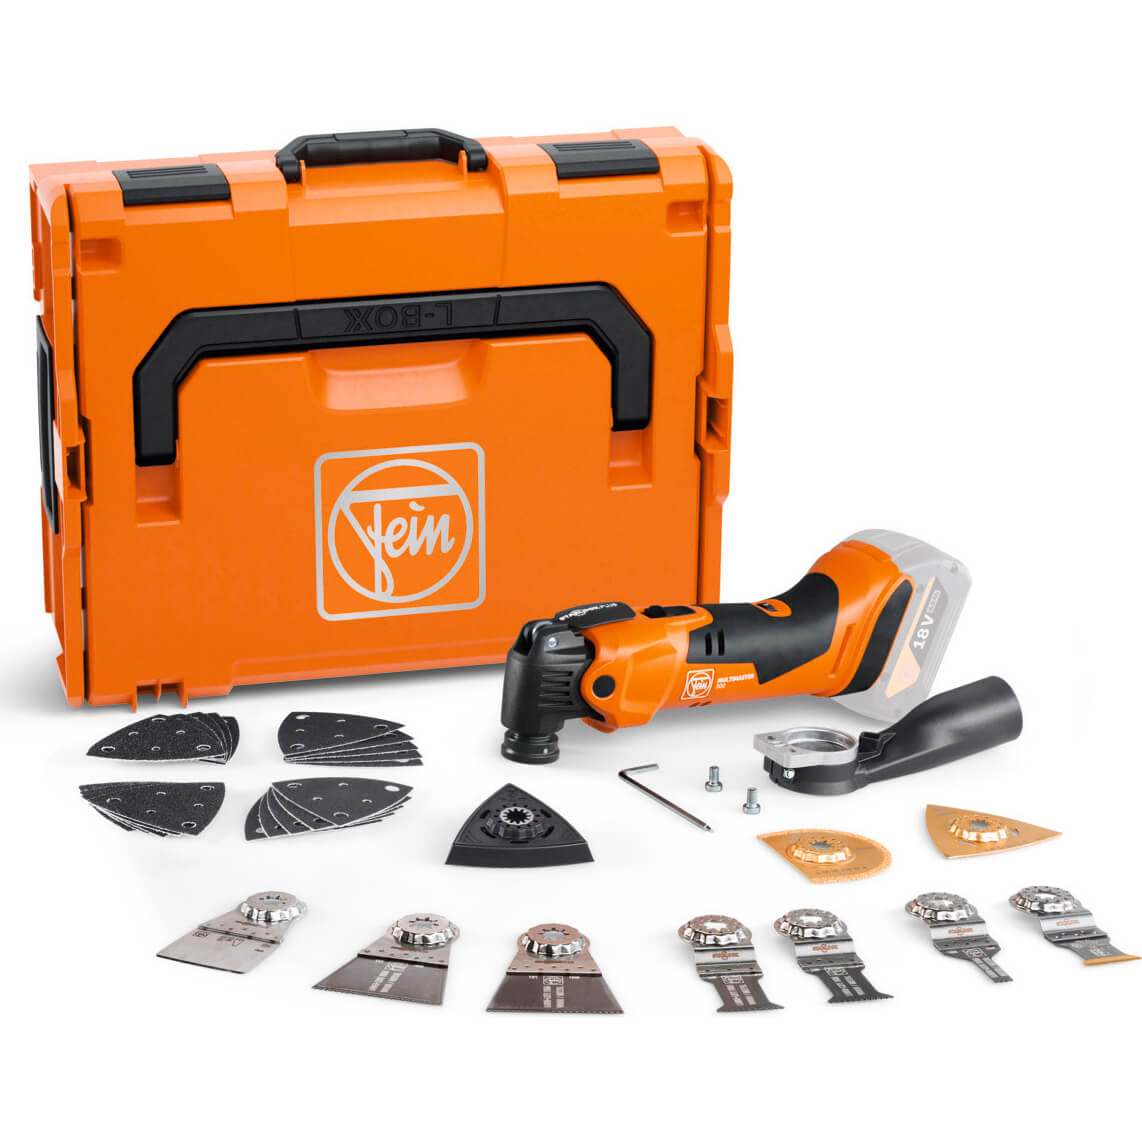 Image of Fein AMM 500 Plus AMPShare 18v Cordless MultiMaster Multi Tool No Batteries No Charger Case & Accessories